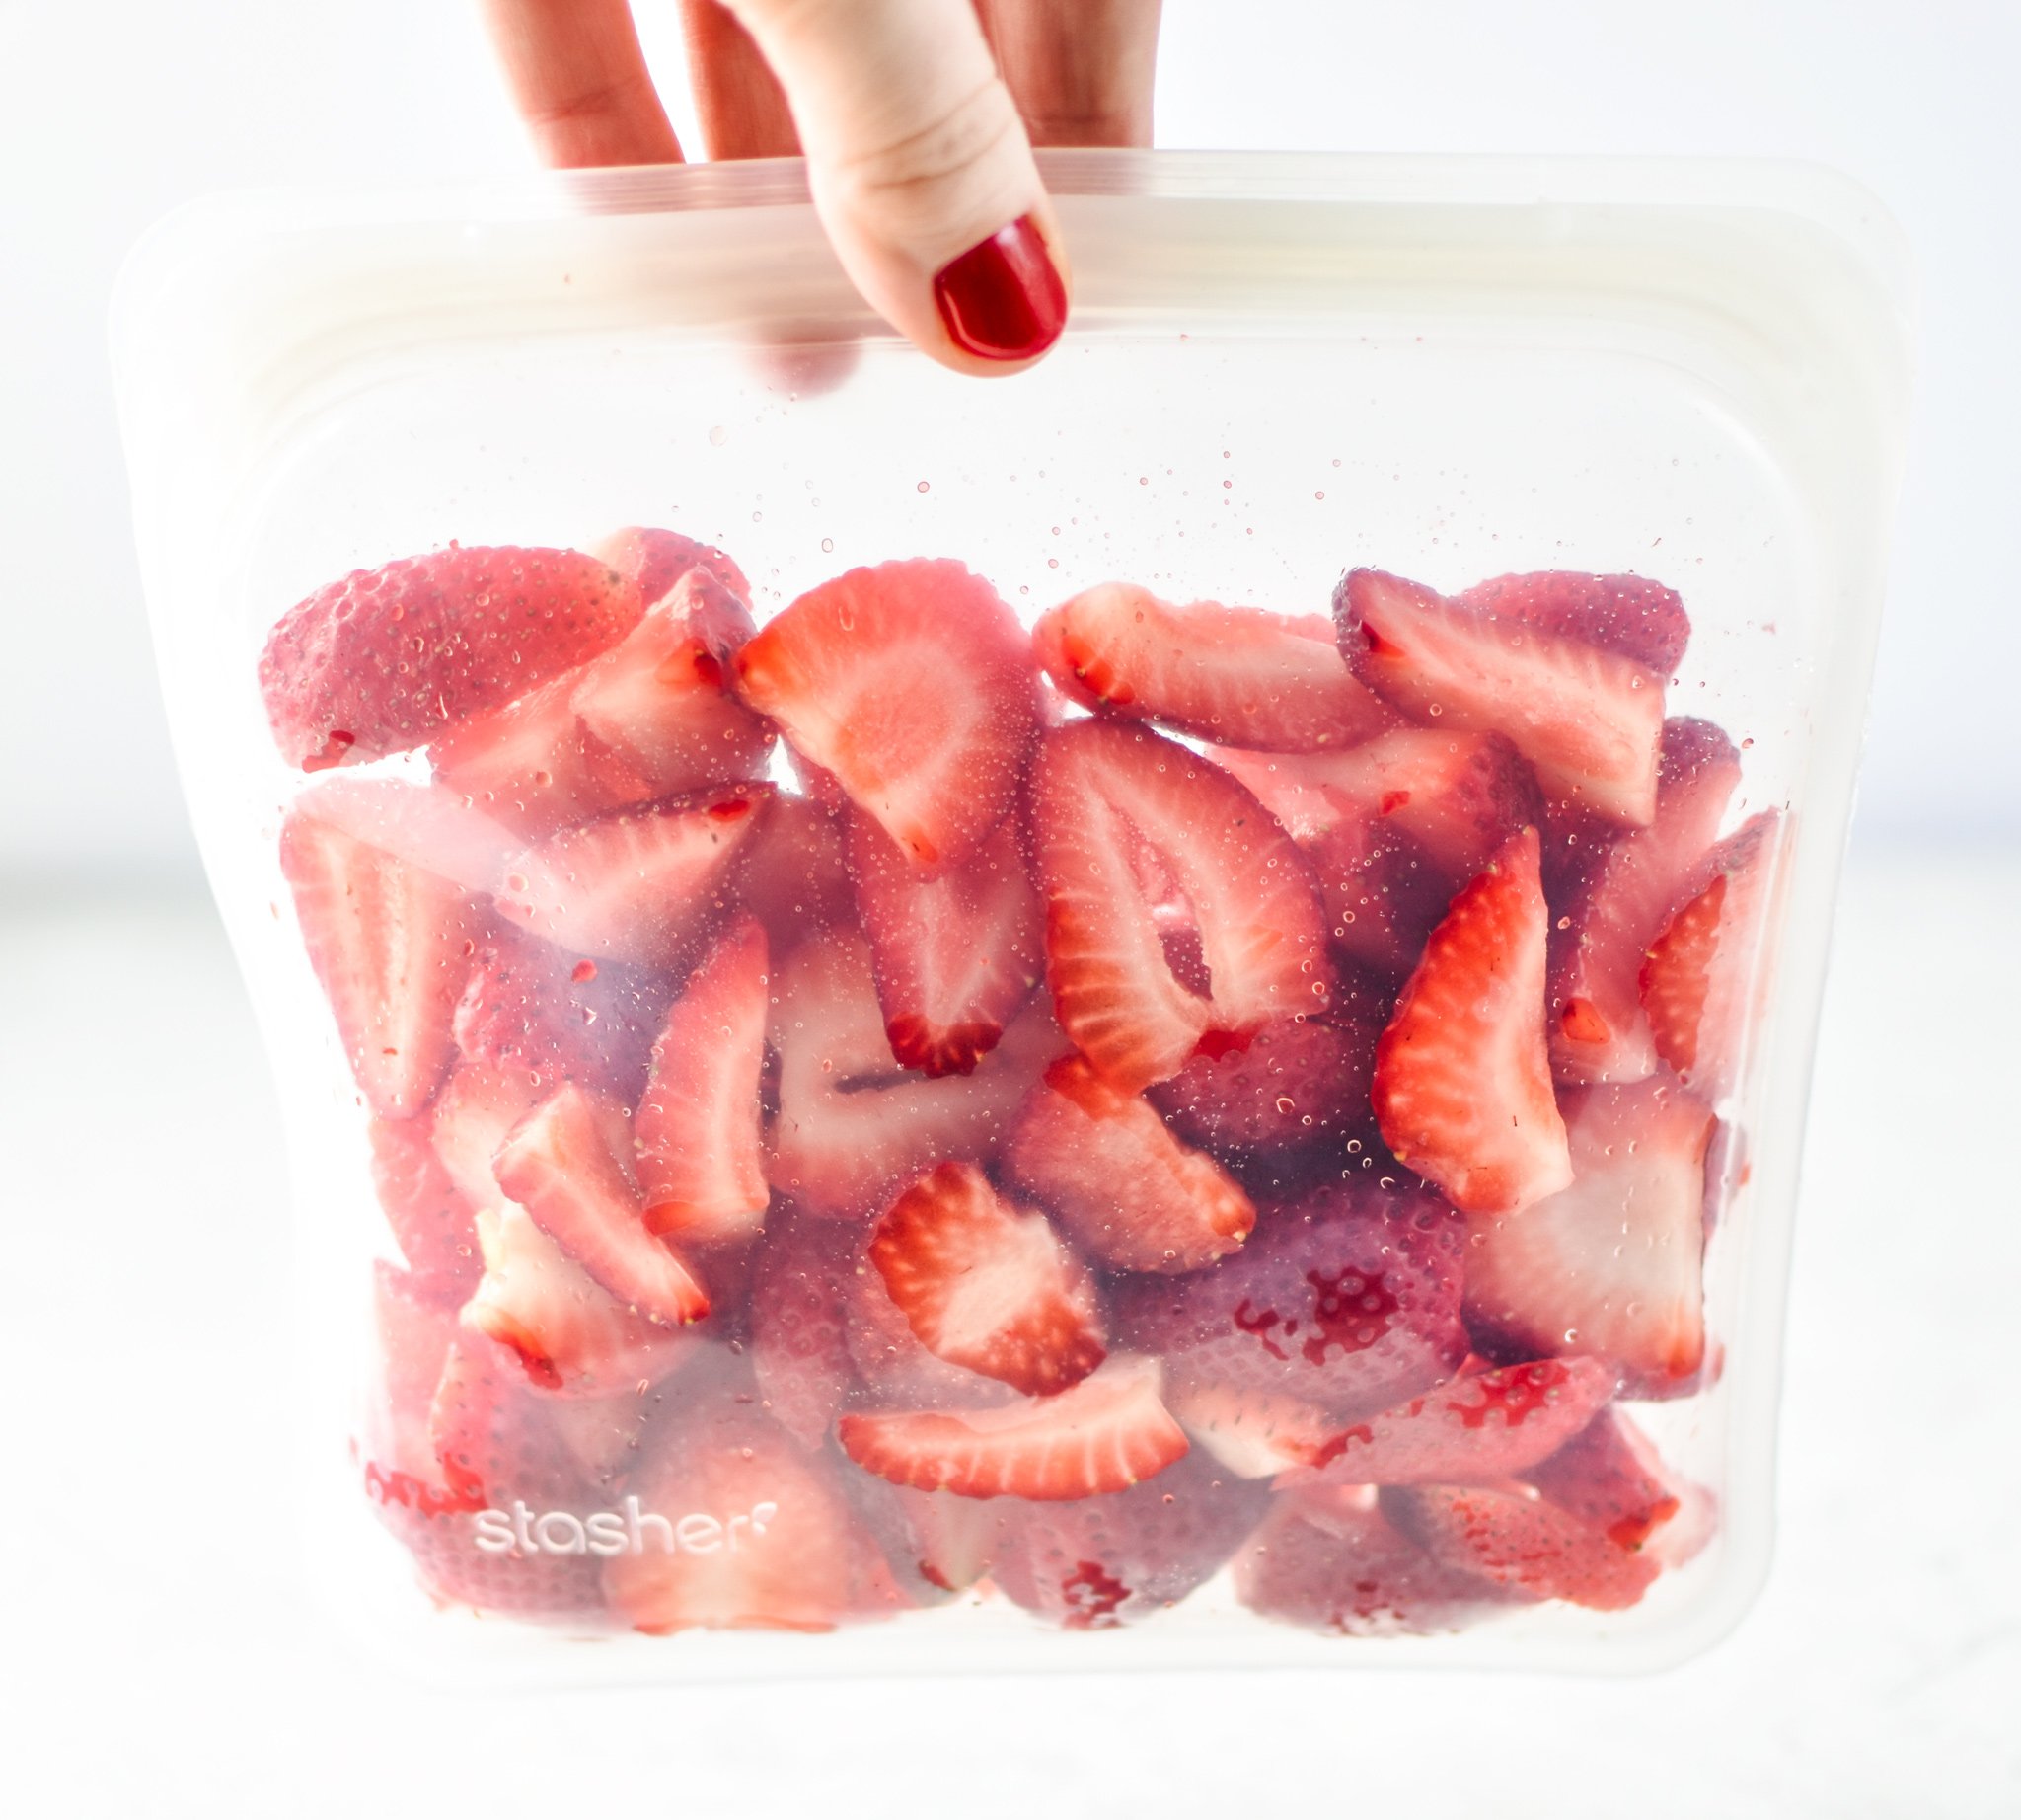 Cut up strawberries in a Stasher Silicone Reusable Bag instead of using a Ziploc.